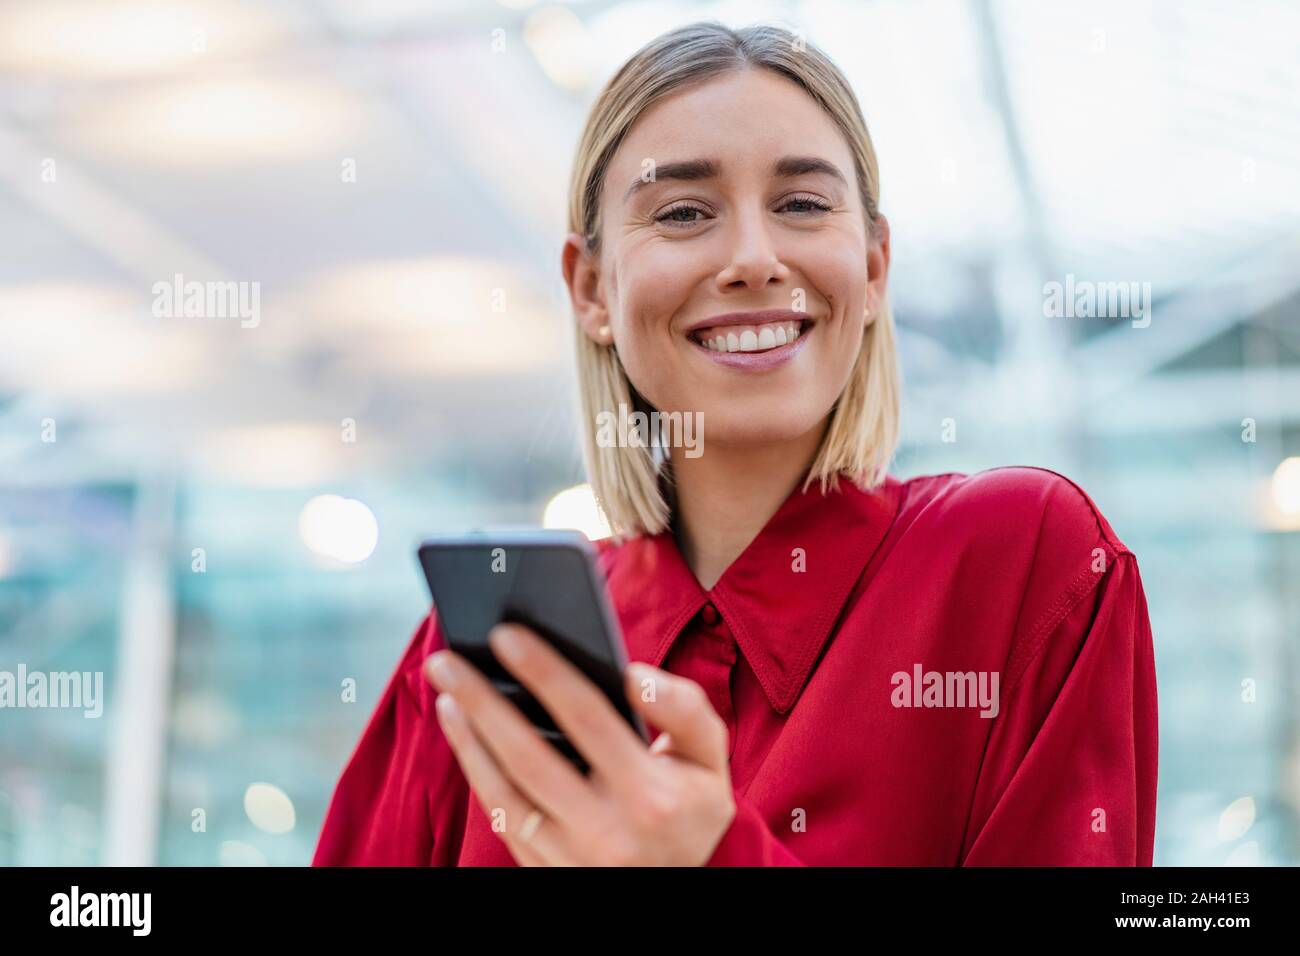 Portrait of a smiling young businesswoman with cell phone Stock Photo